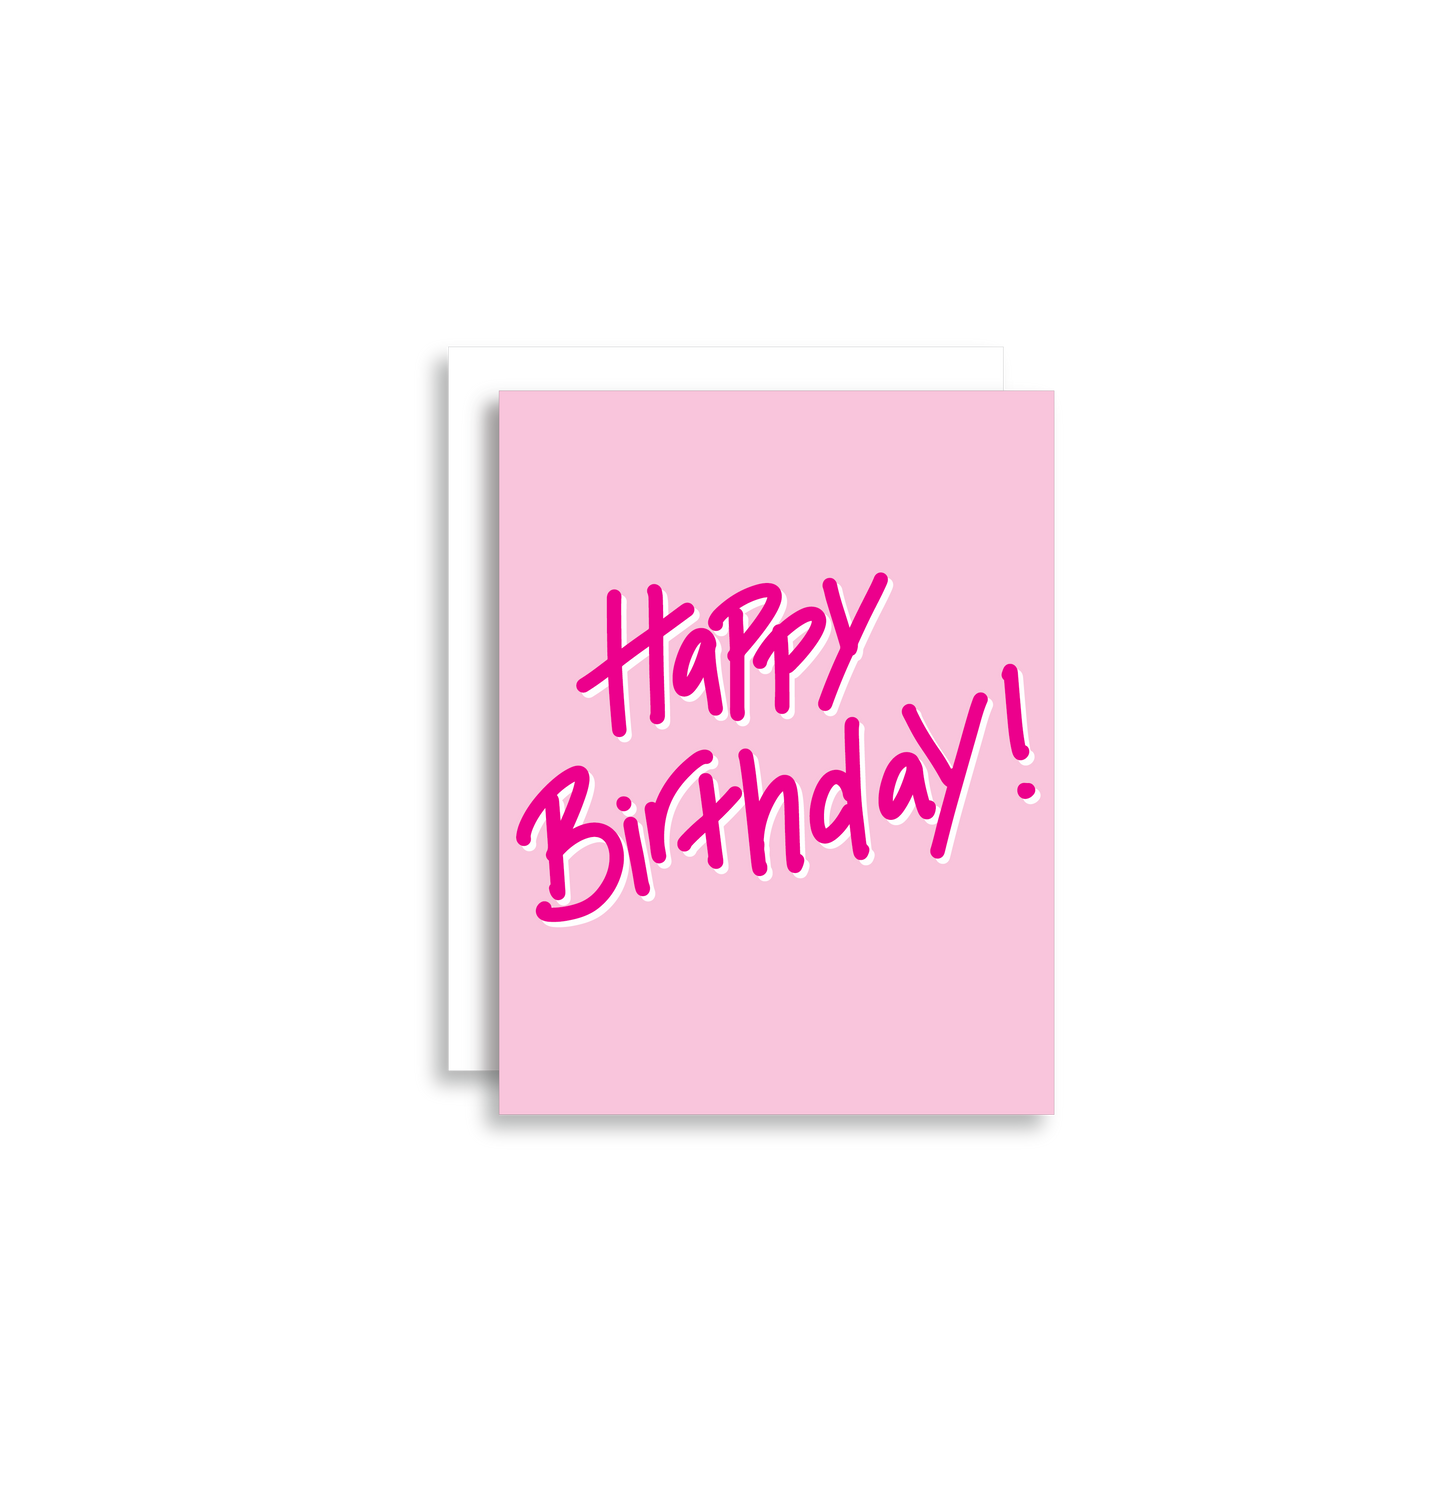 Birthday wishes are pretty in pink! Each card is folded to 4.25" tall by 5.5" wide, is blank inside and comes with a matching white envelope. Cards are packaged in cellophane sleeves.